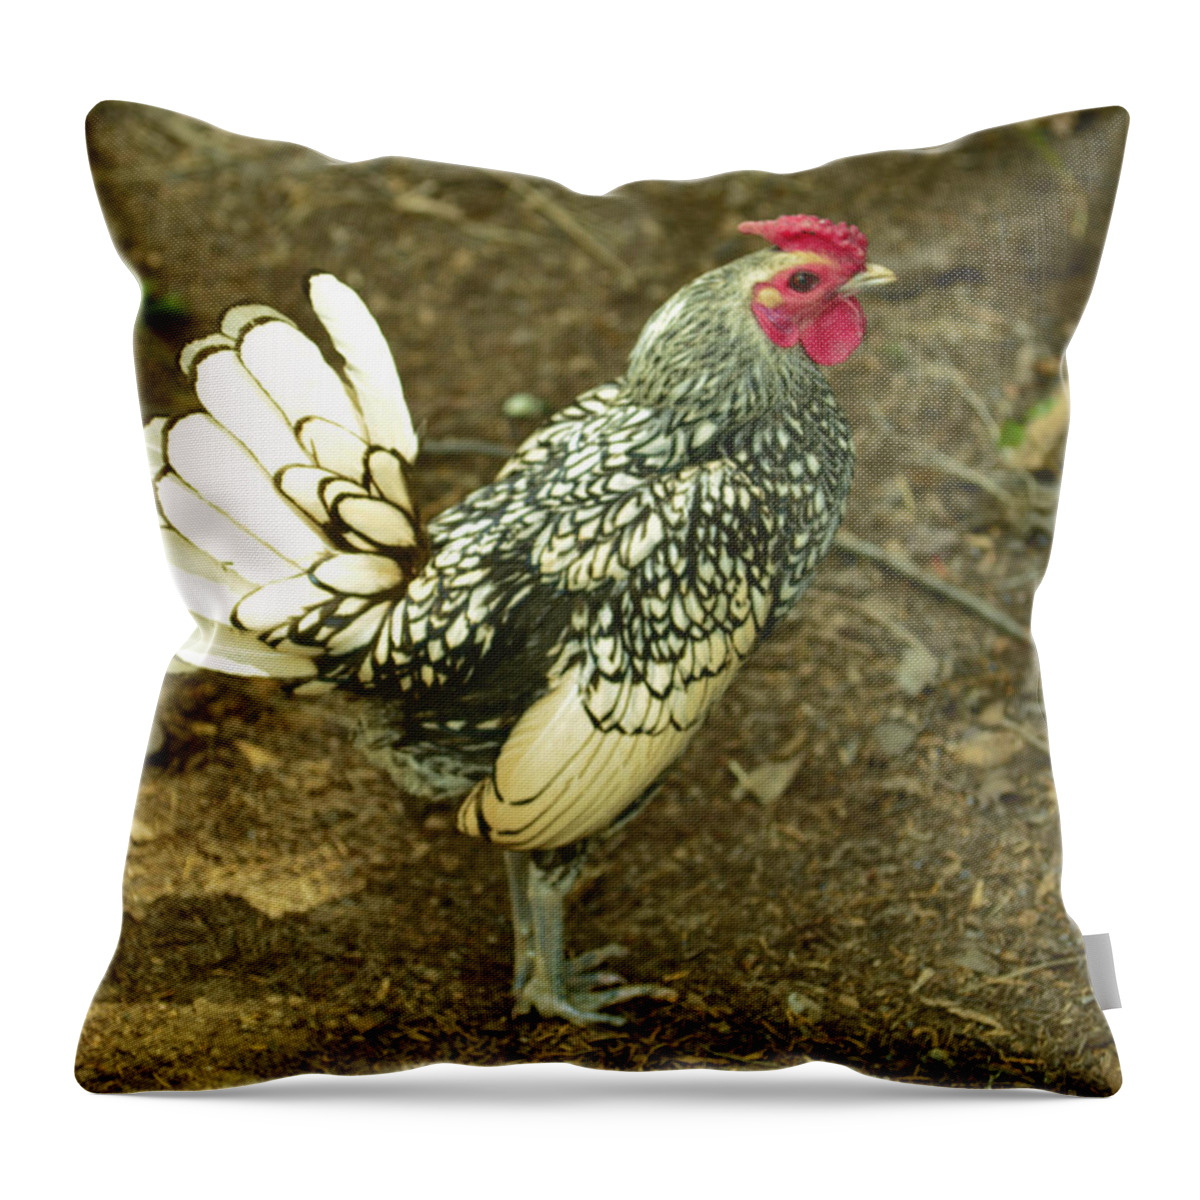 Rooster Throw Pillow featuring the photograph Silver Seabright Rooster by Donna Brown